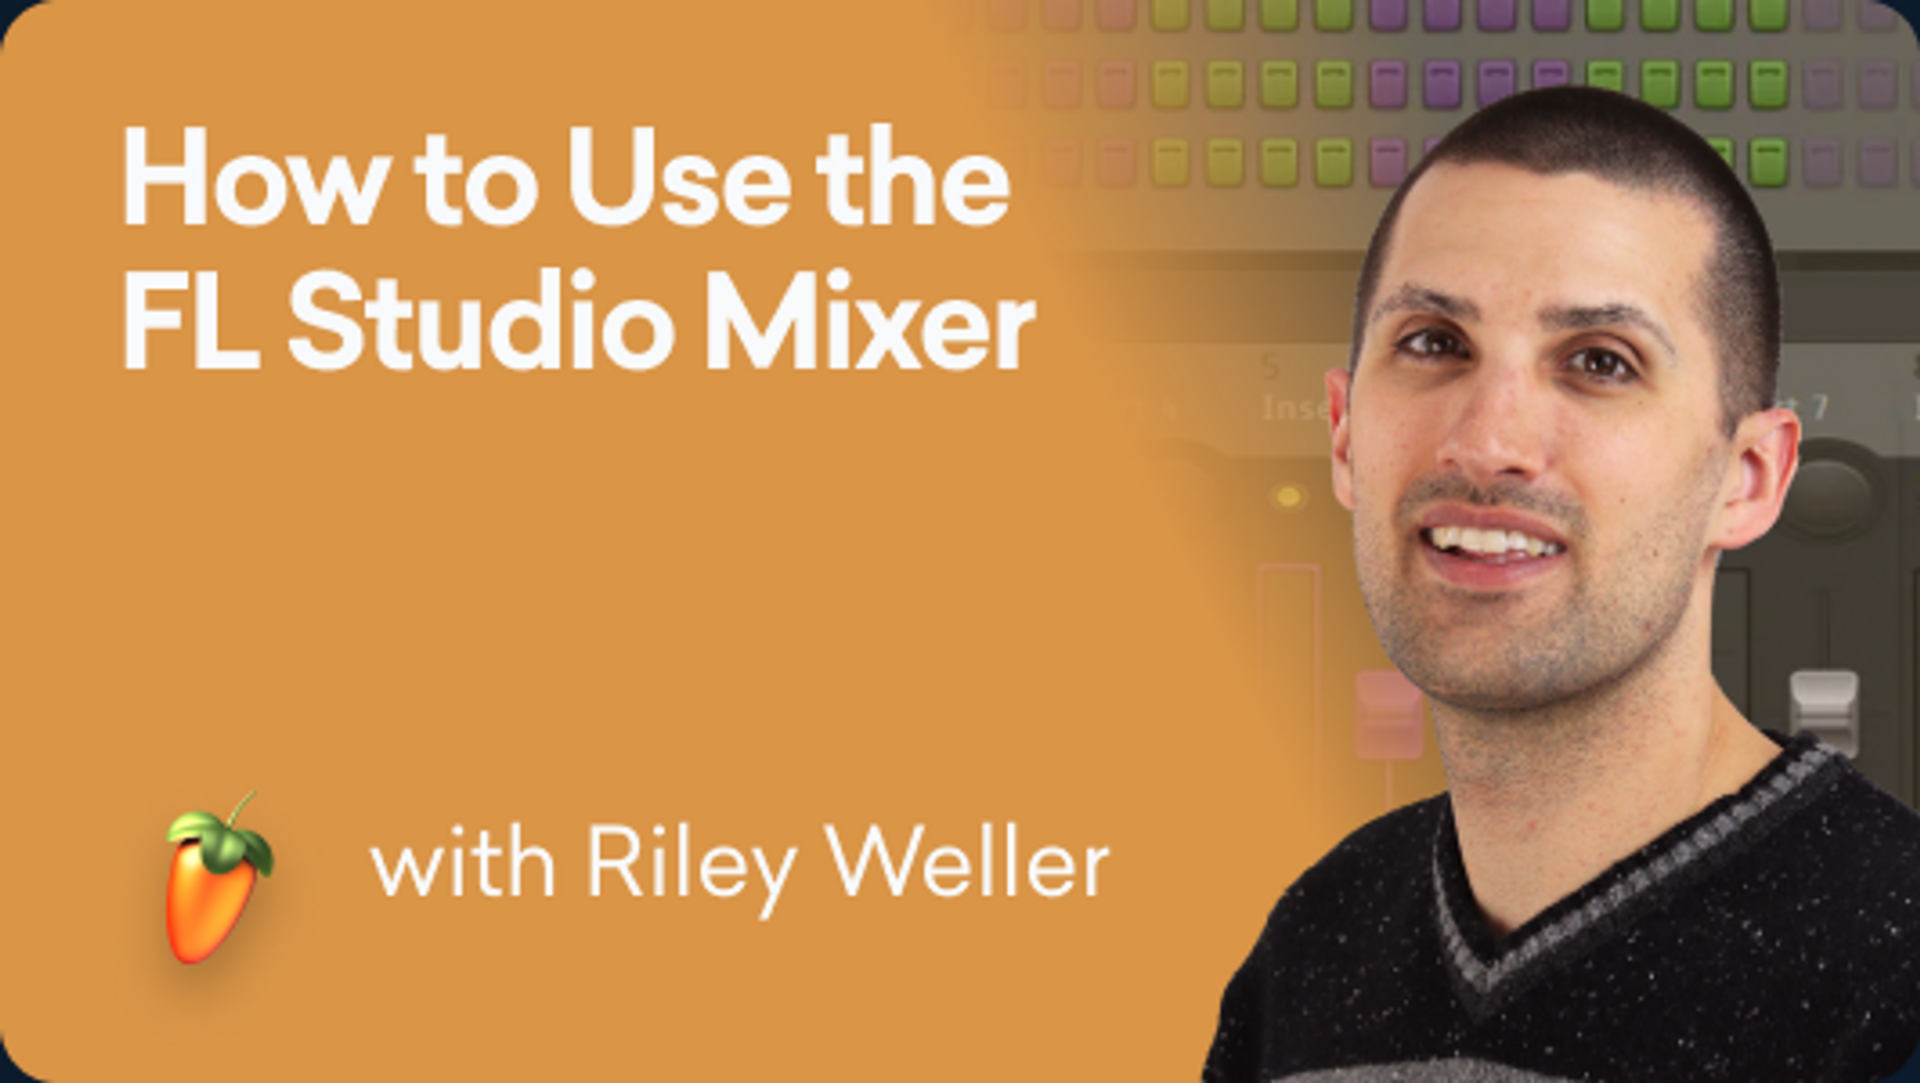 How to use the FL Studio Mixer